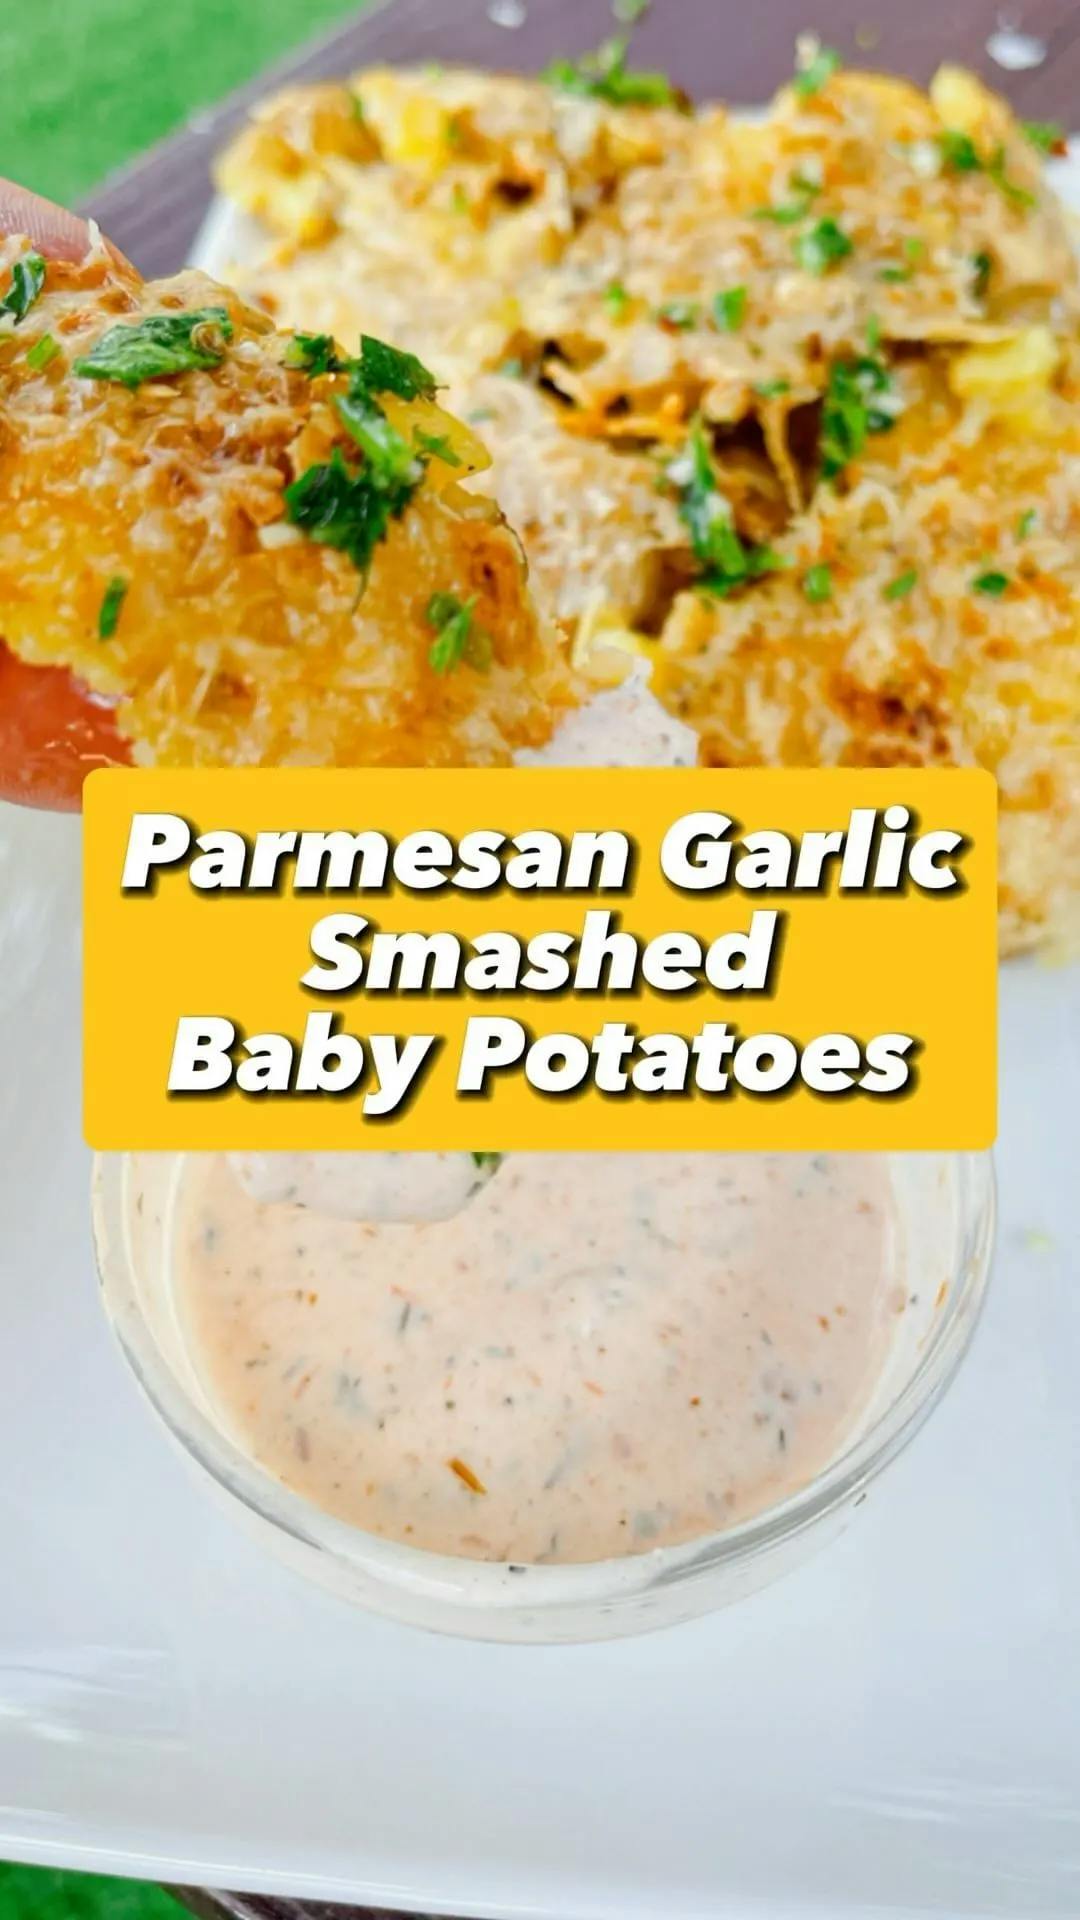 Picture for Parmesan Garlic Smashed Baby Potatoes